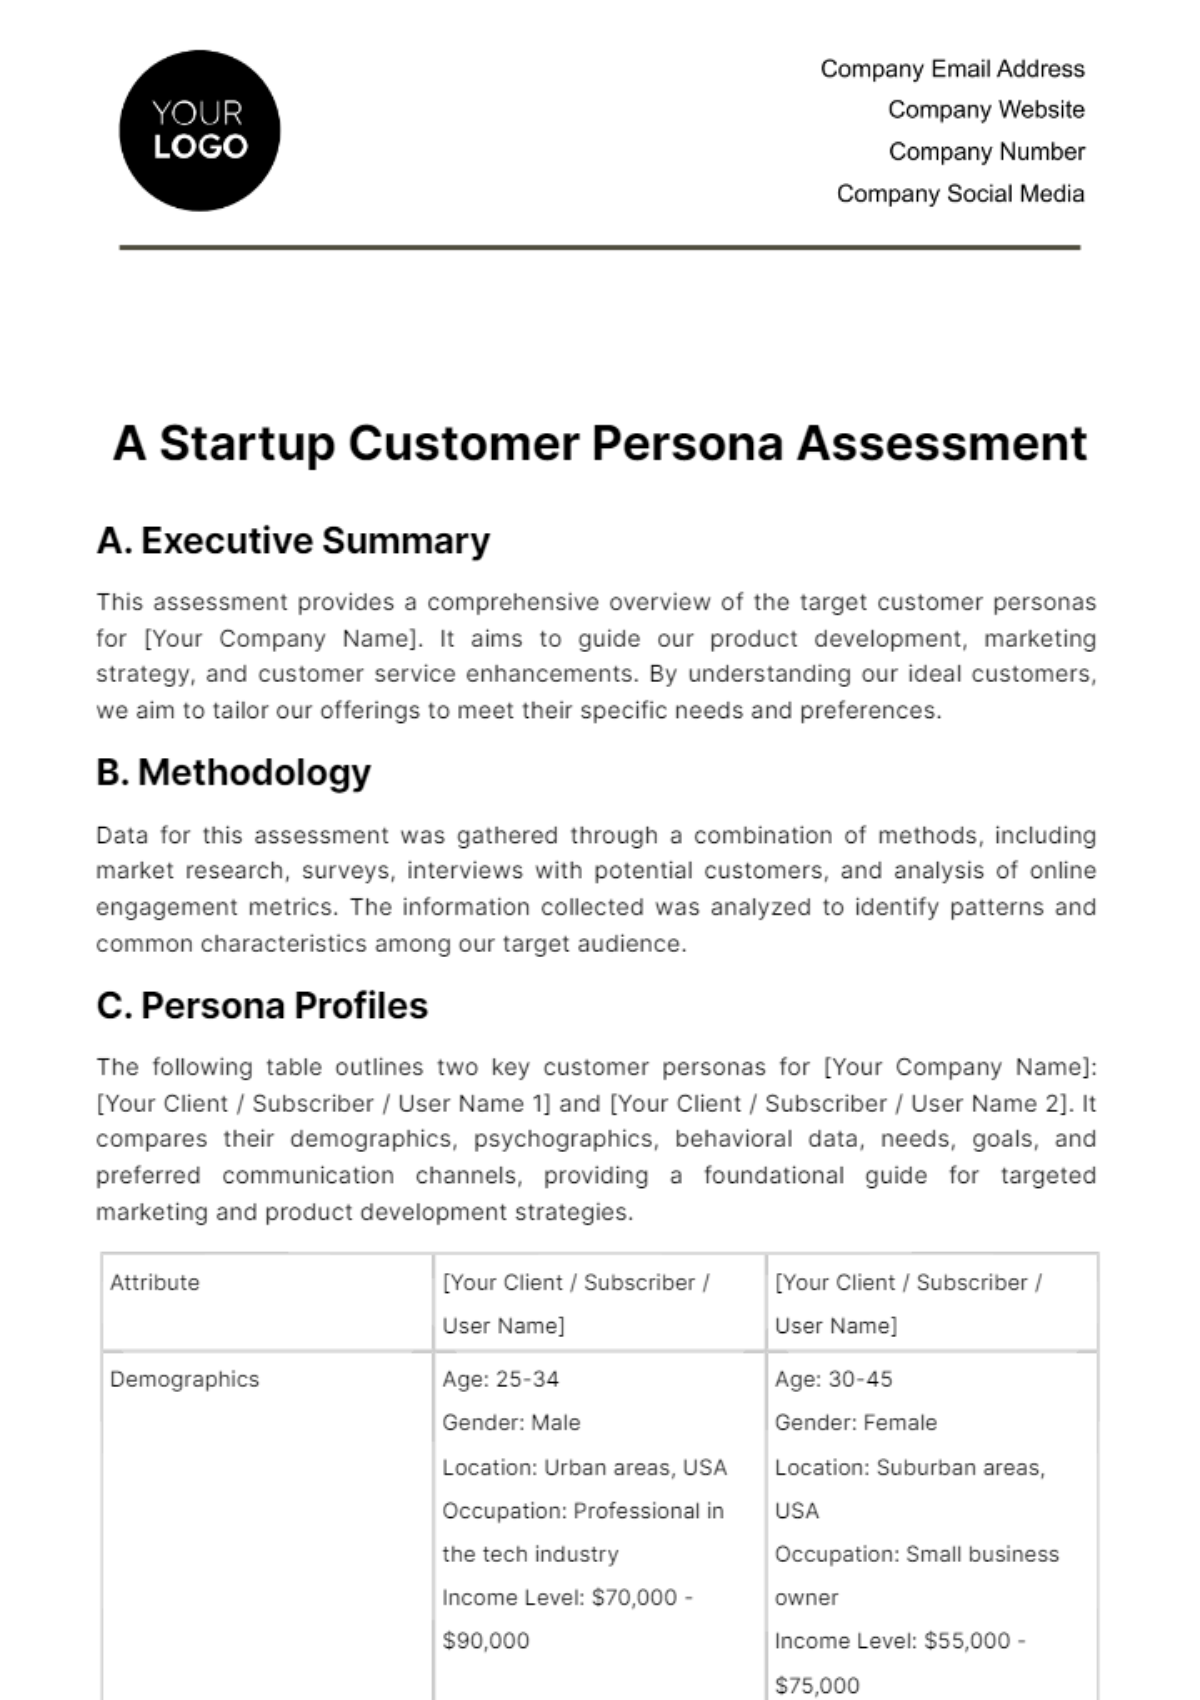 Free Startup Customer Persona Assessment Template